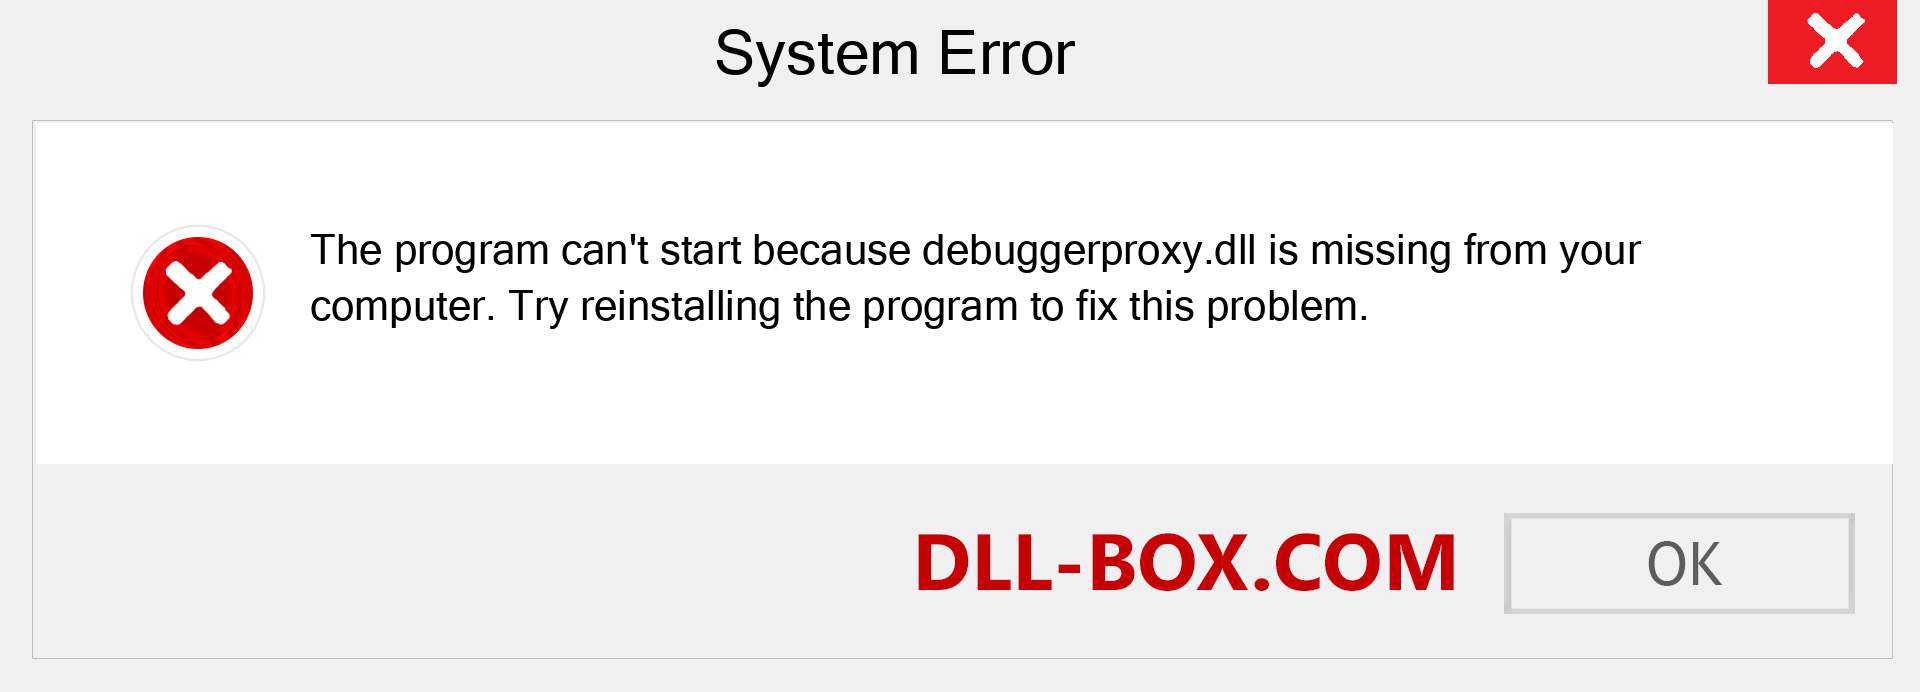  debuggerproxy.dll file is missing?. Download for Windows 7, 8, 10 - Fix  debuggerproxy dll Missing Error on Windows, photos, images